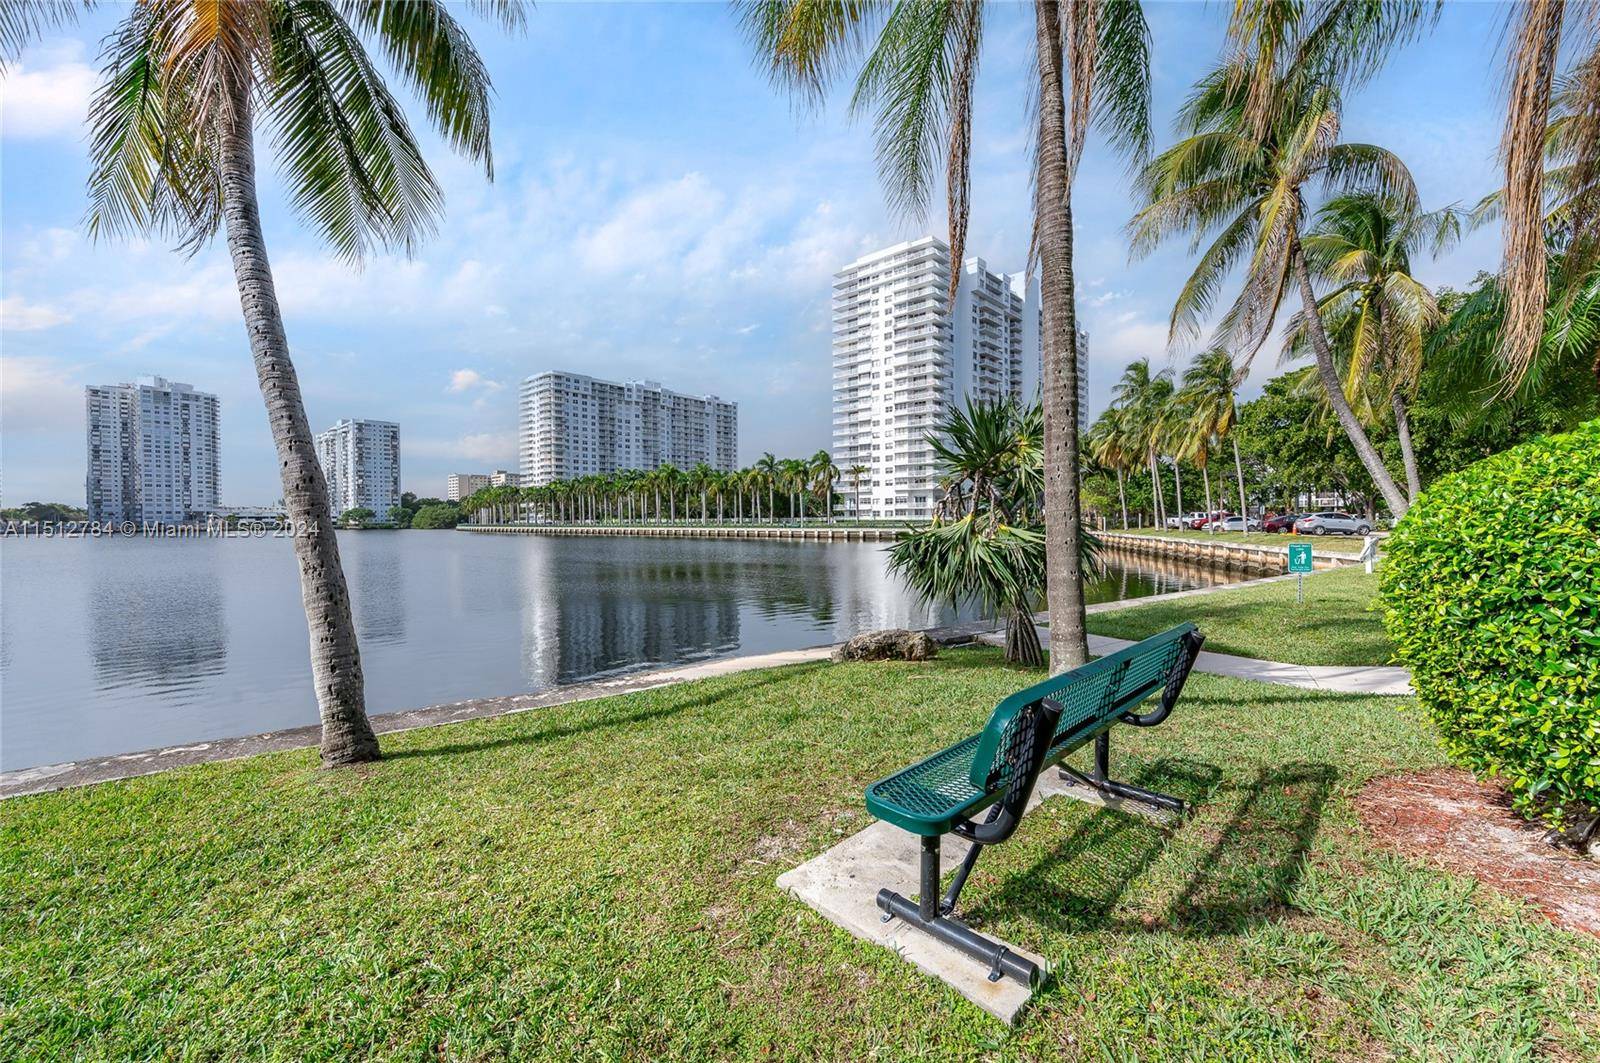 Enjoy this Excellent Water view from your balcony near the Lake !